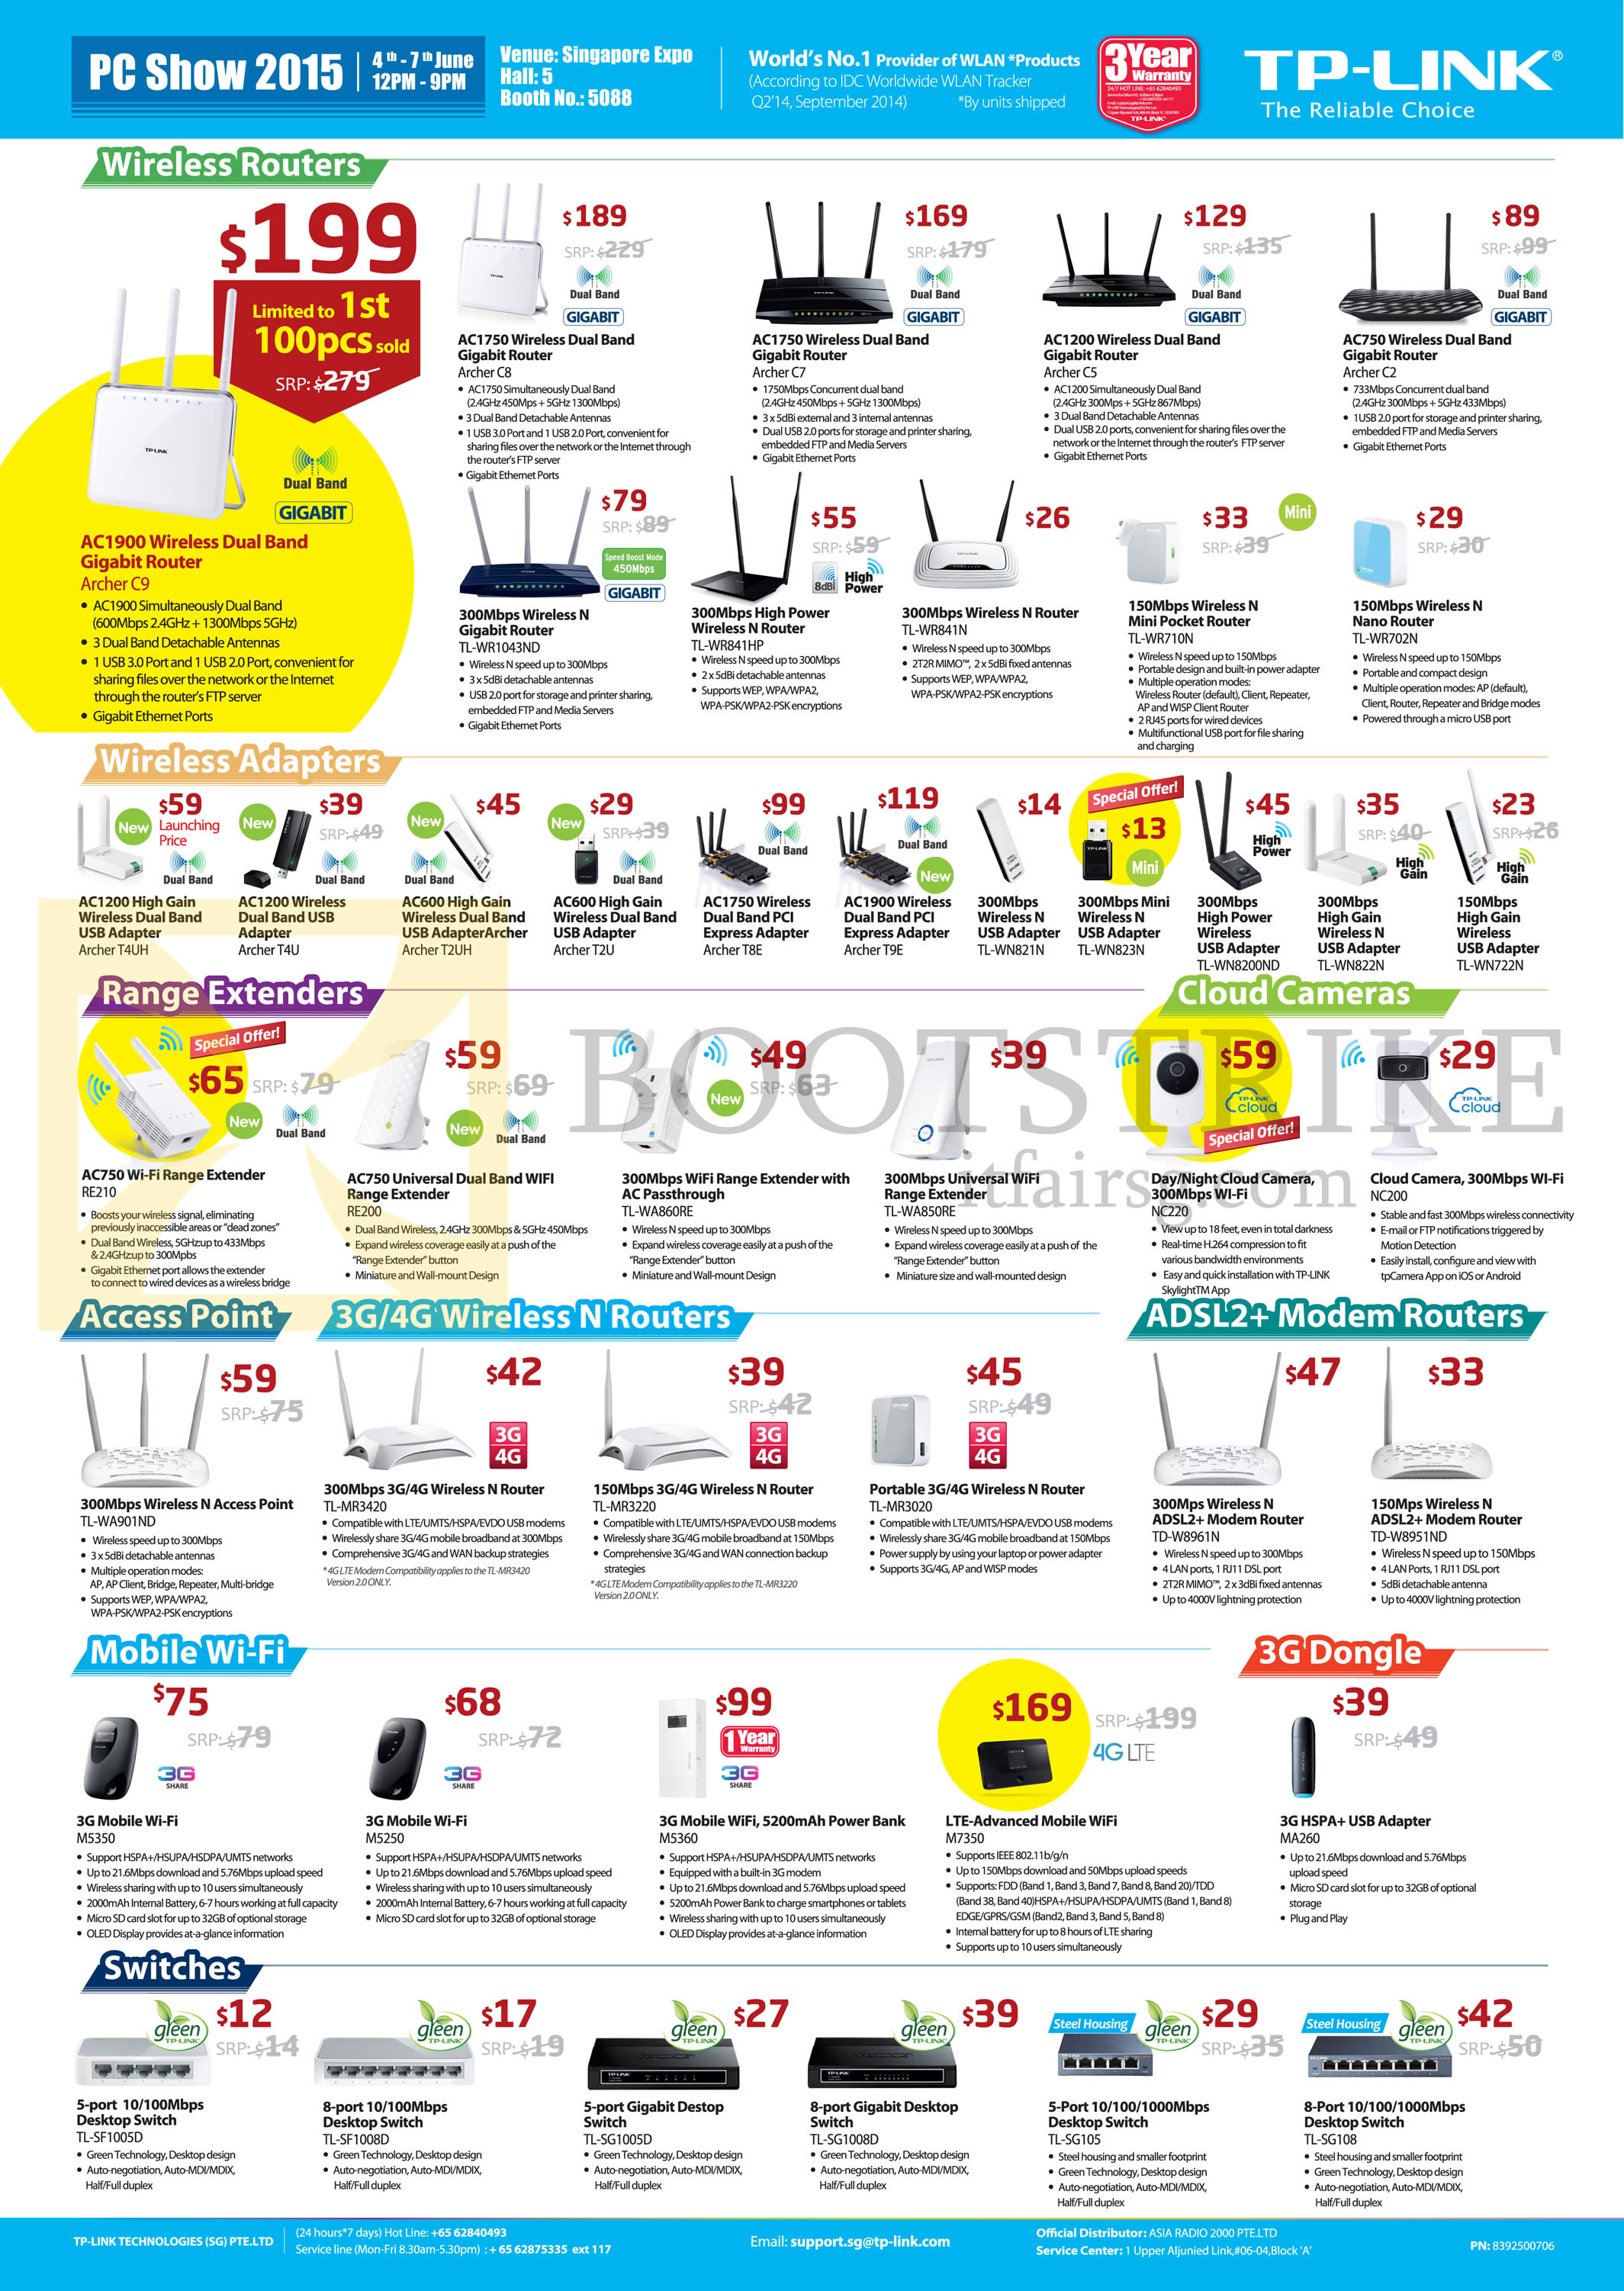 PC SHOW 2015 price list image brochure of Asia Radio TP-Link Networking IPCam, Wireless Adapters, Range Extenders, Access Point, N Routers, ADSL2, Modem Routers, Mobile Wi-Fi, 3G Dongle, Switches